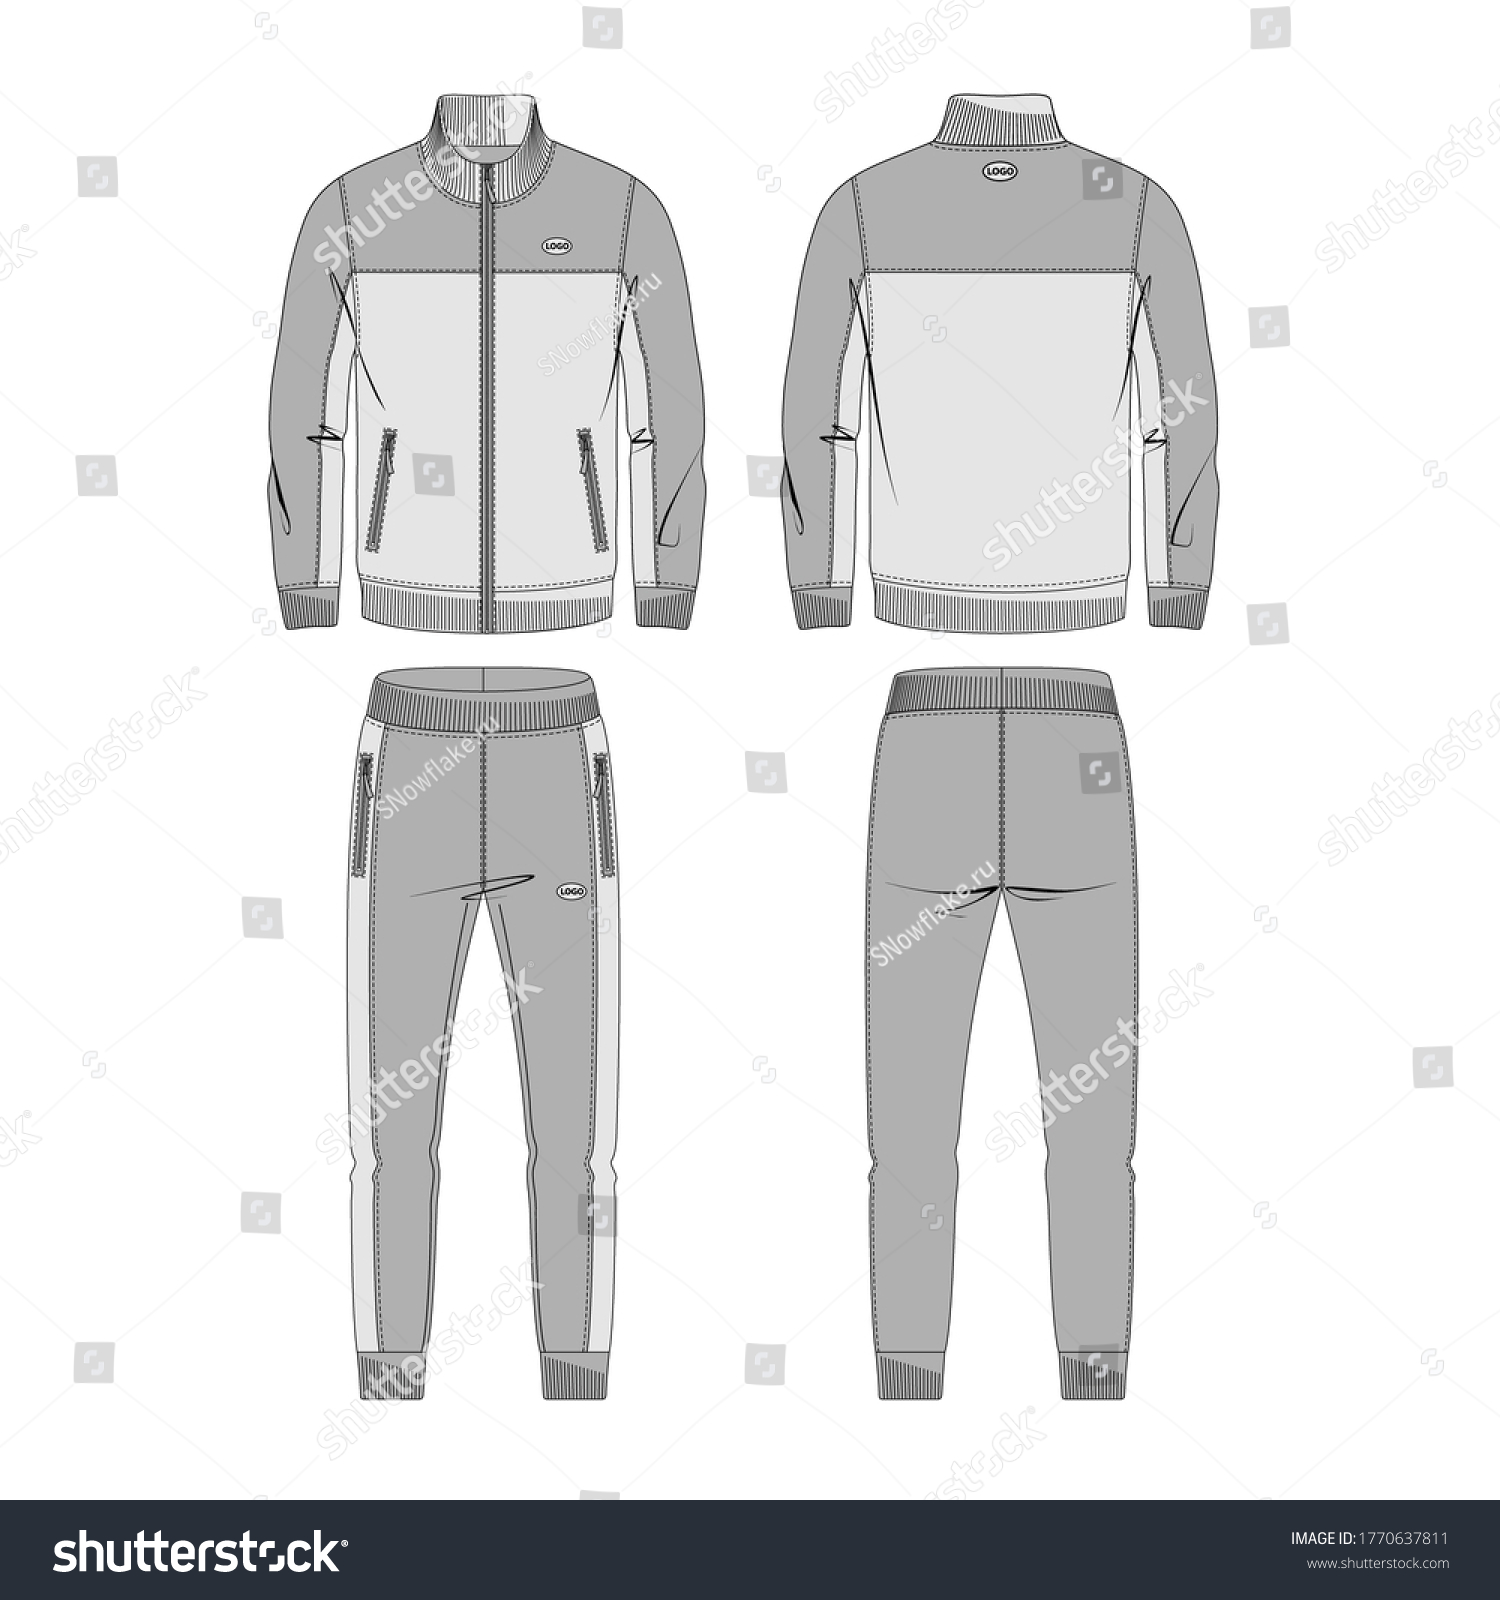 1,266 Tracksuit draw Images, Stock Photos & Vectors | Shutterstock